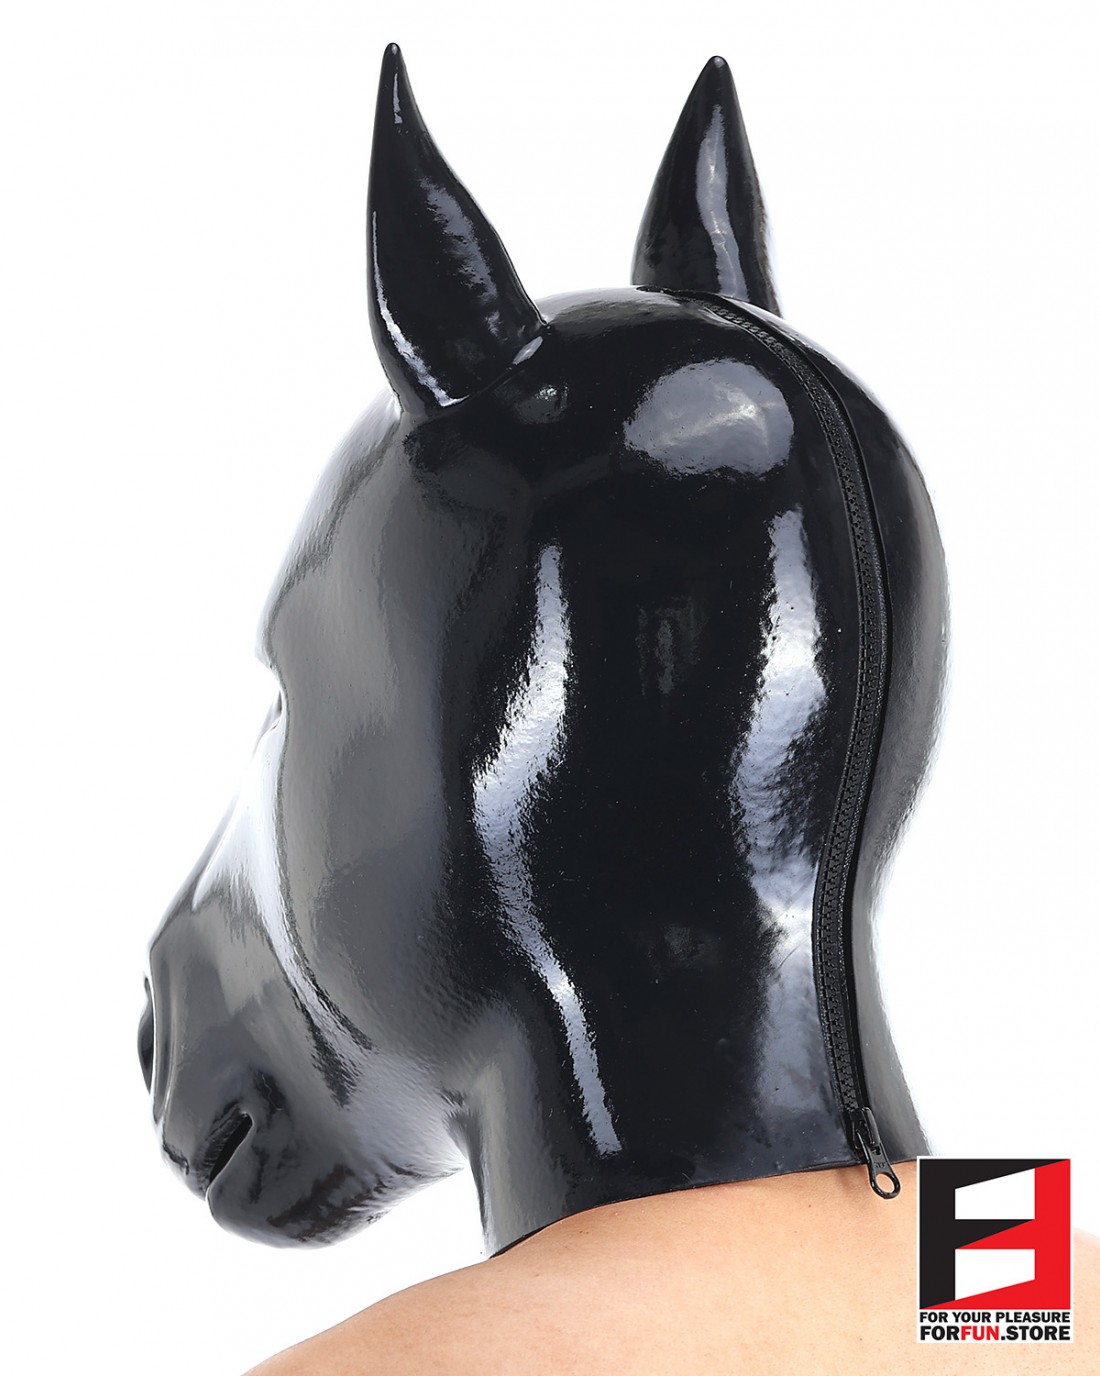 RUBBER HORSE MASK FOR YOUR PLEASURE : FORFUN